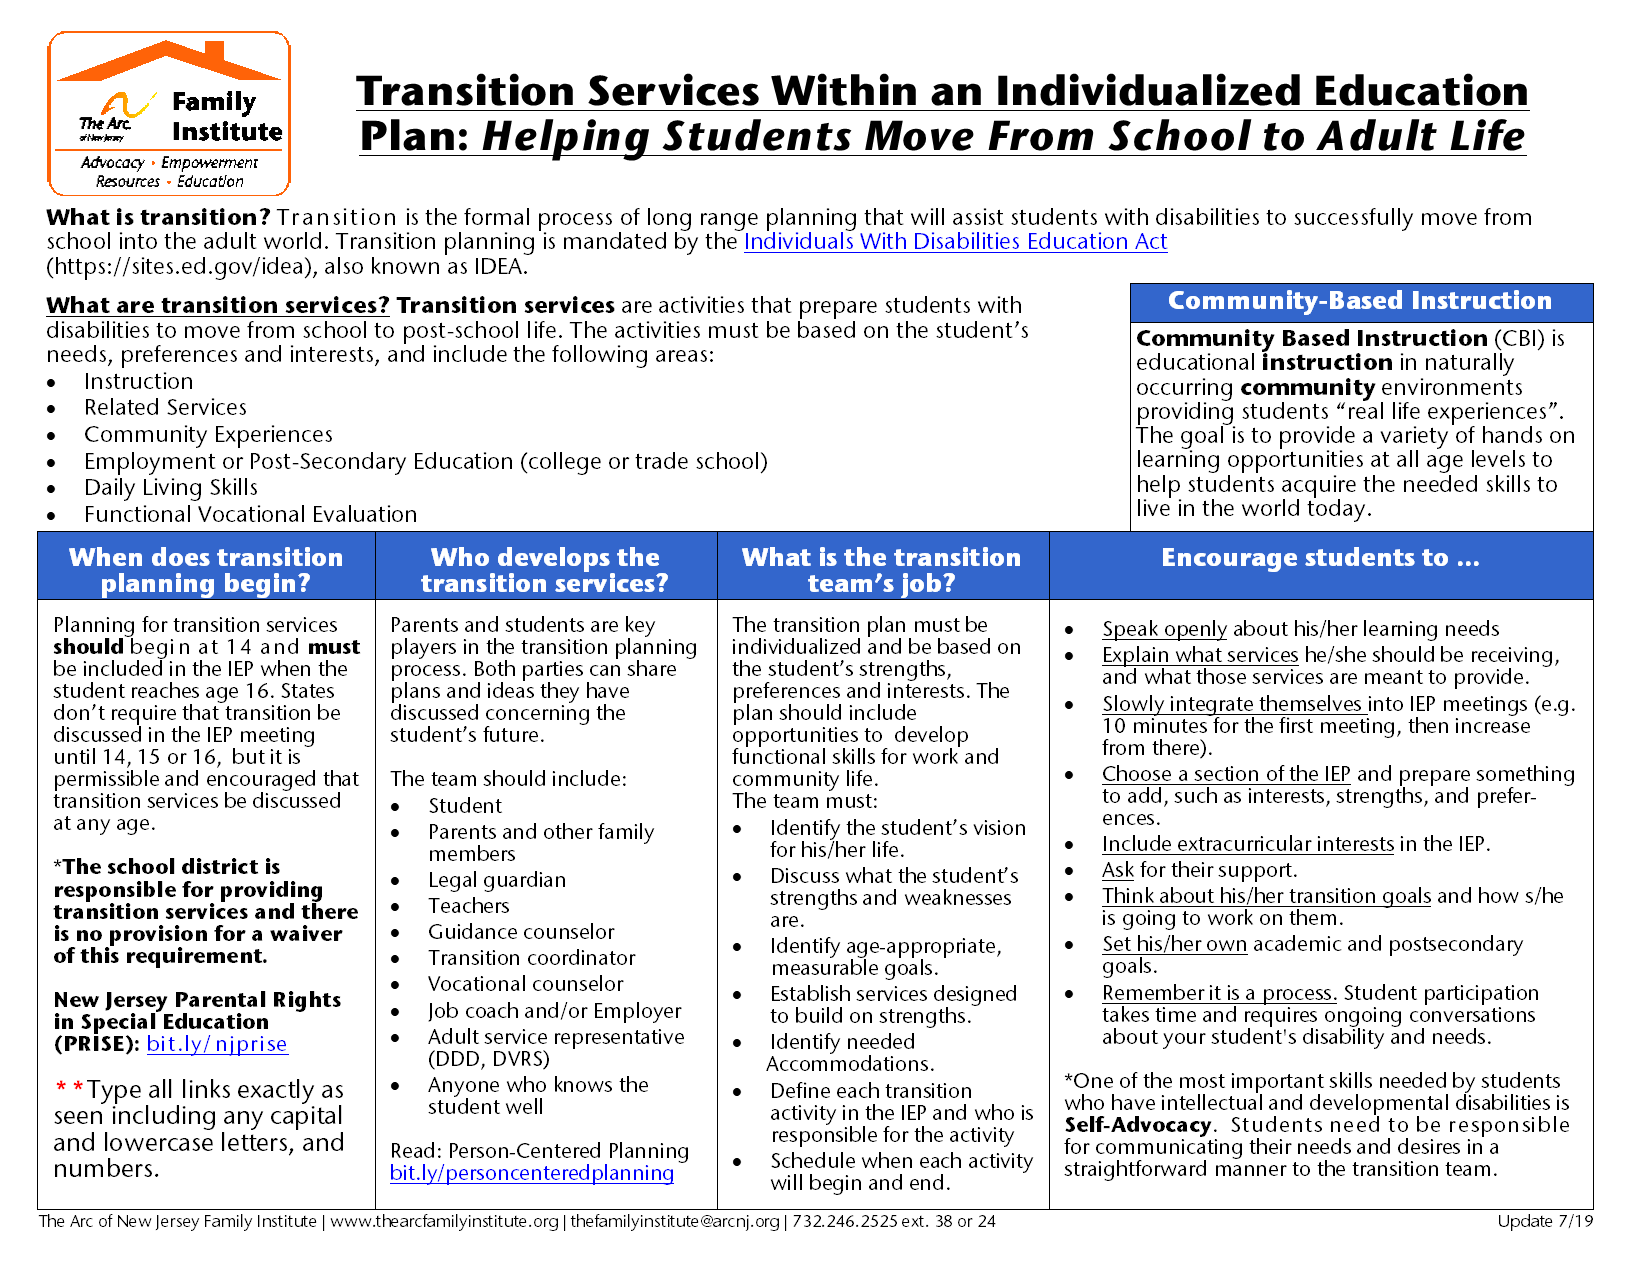 Transition Services Within an Individualized Education Plan: Helping Students Move From School to Adult Life